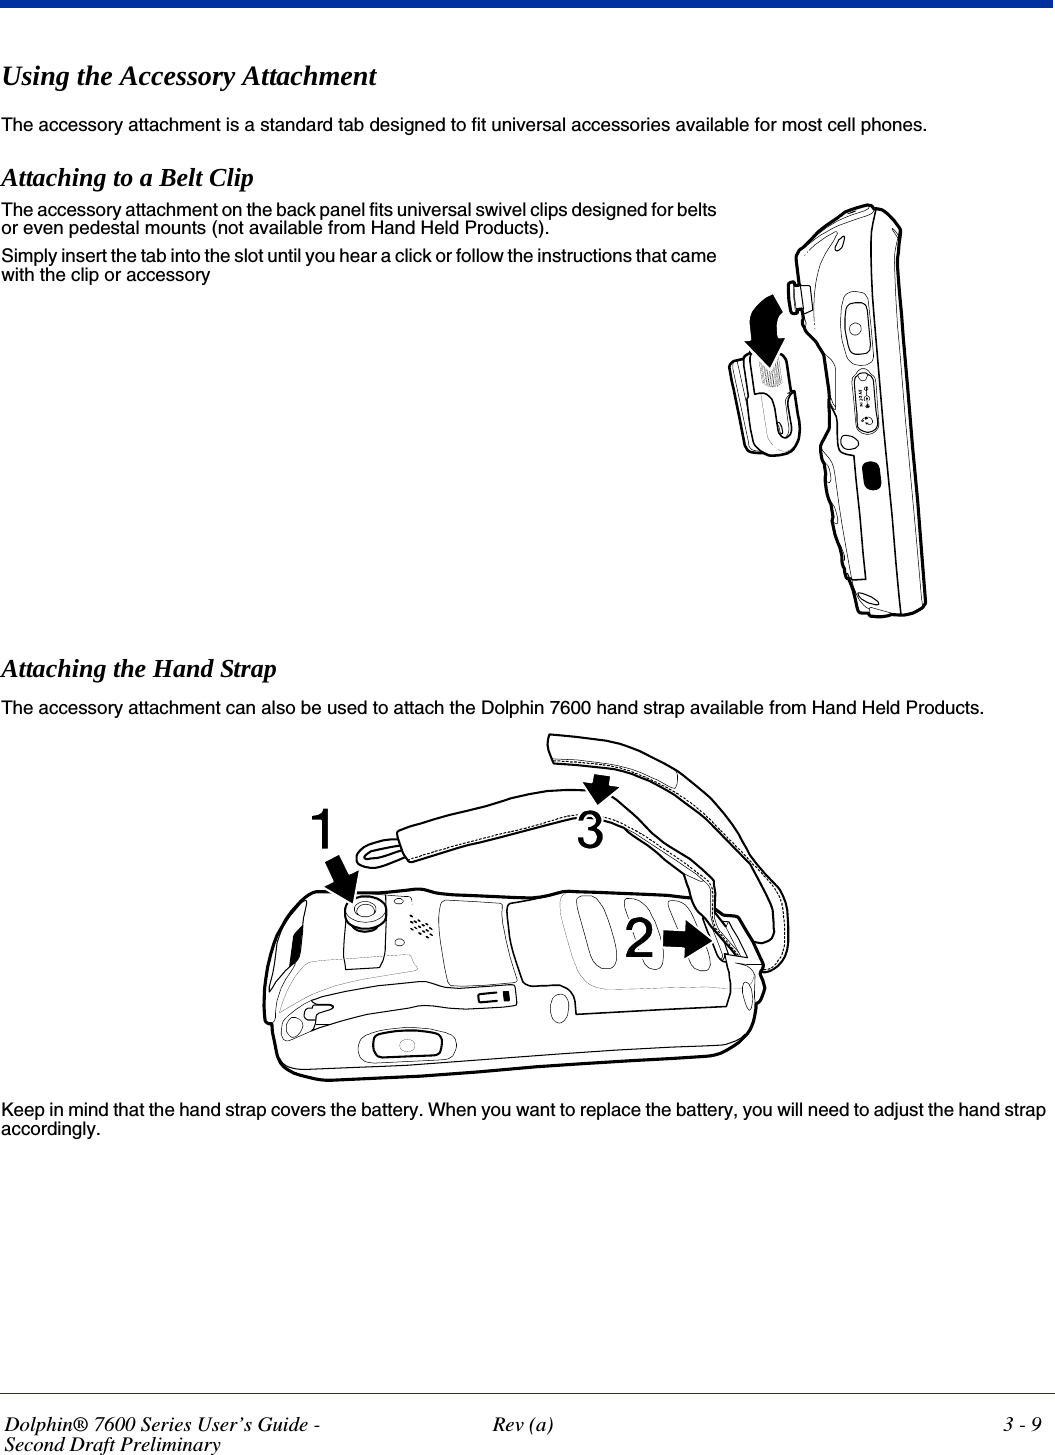 Dolphin® 7600 Series User’s Guide -Second Draft PreliminaryRev (a) 3 - 9Using the Accessory AttachmentThe accessory attachment is a standard tab designed to fit universal accessories available for most cell phones.Attaching to a Belt ClipAttaching the Hand StrapThe accessory attachment can also be used to attach the Dolphin 7600 hand strap available from Hand Held Products.Keep in mind that the hand strap covers the battery. When you want to replace the battery, you will need to adjust the hand strap accordingly.The accessory attachment on the back panel fits universal swivel clips designed for belts or even pedestal mounts (not available from Hand Held Products). Simply insert the tab into the slot until you hear a click or follow the instructions that came with the clip or accessory